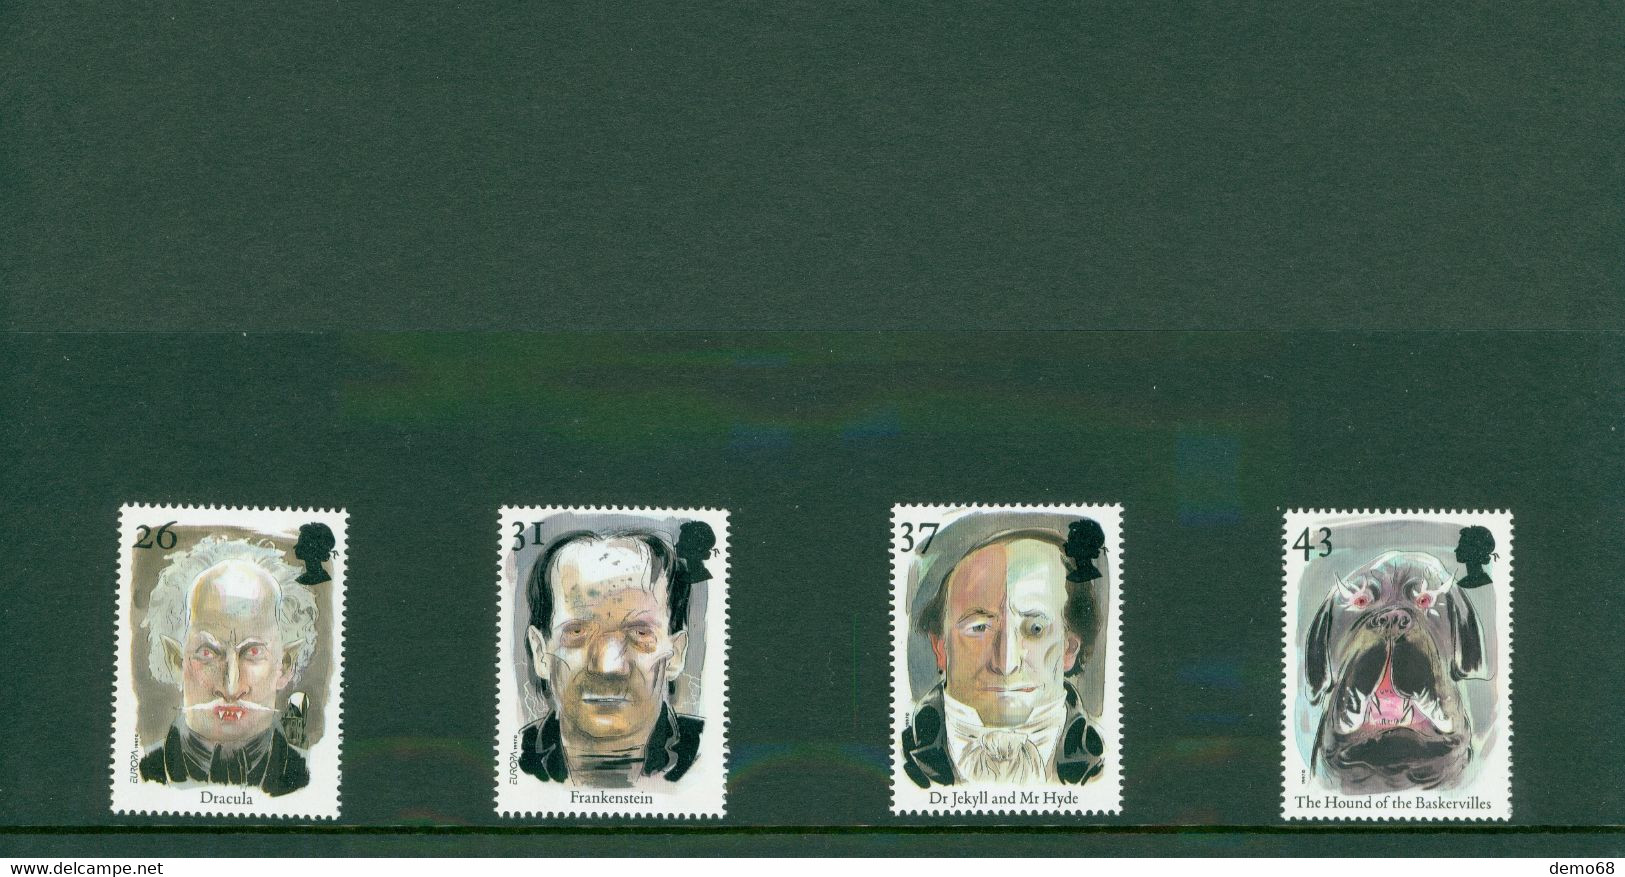 Stamp Timbre England Great Britain British Tales Of Terror Dracula Dr Jeckyll Frankenst. GB New 4 Royal Mail Mint Stamps - Sammlungen